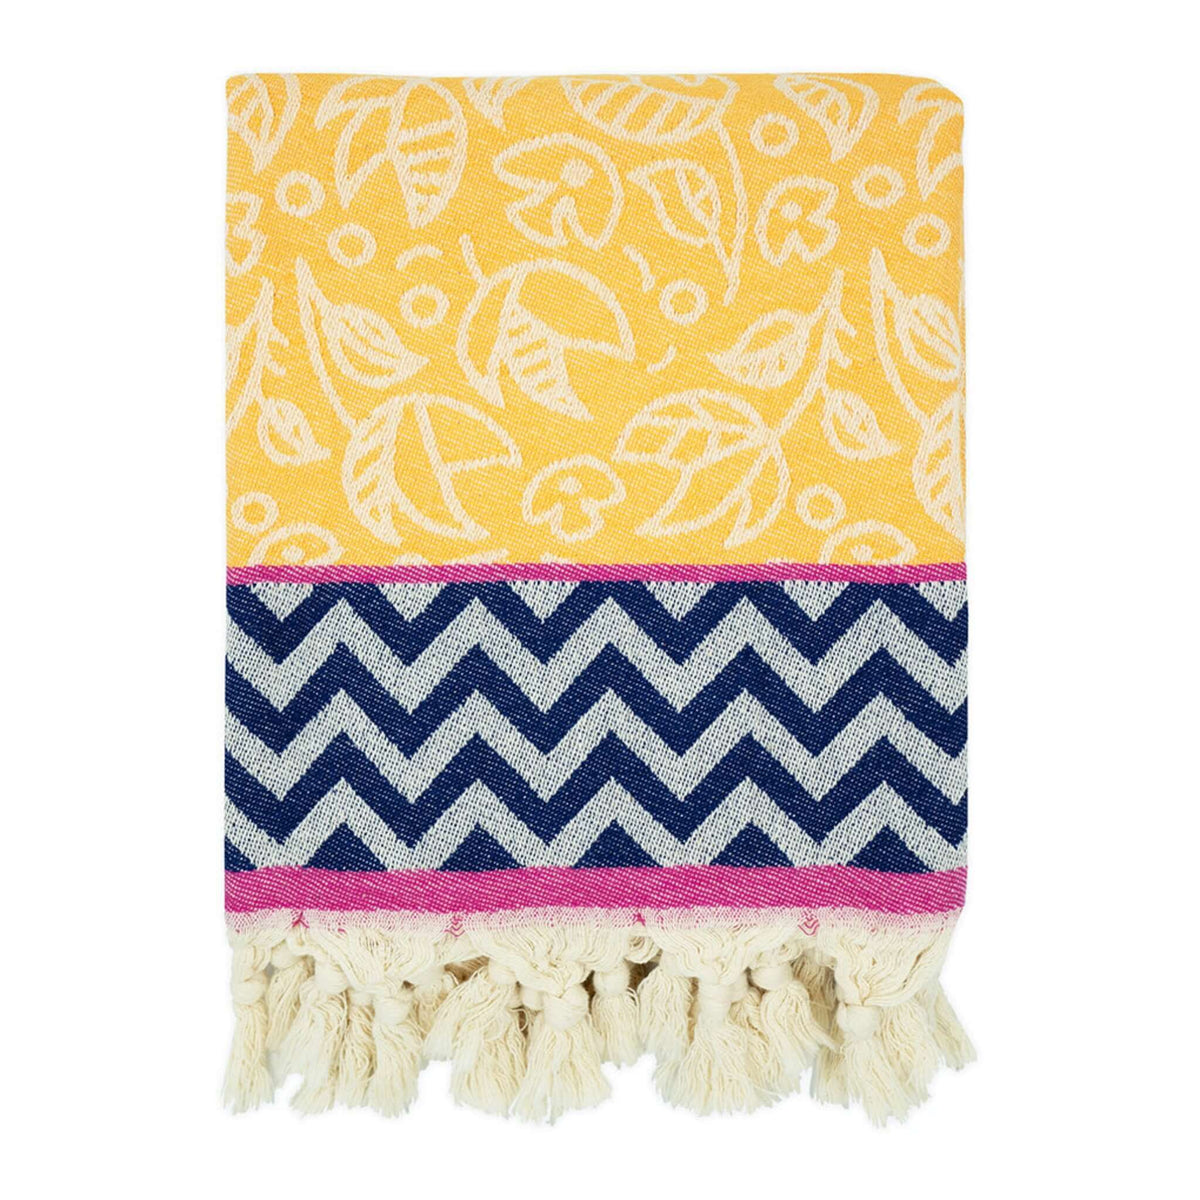 turkish towel yellow flower and blue zigzag pattern with tassels knots vibrant colours fun design designer fashinable